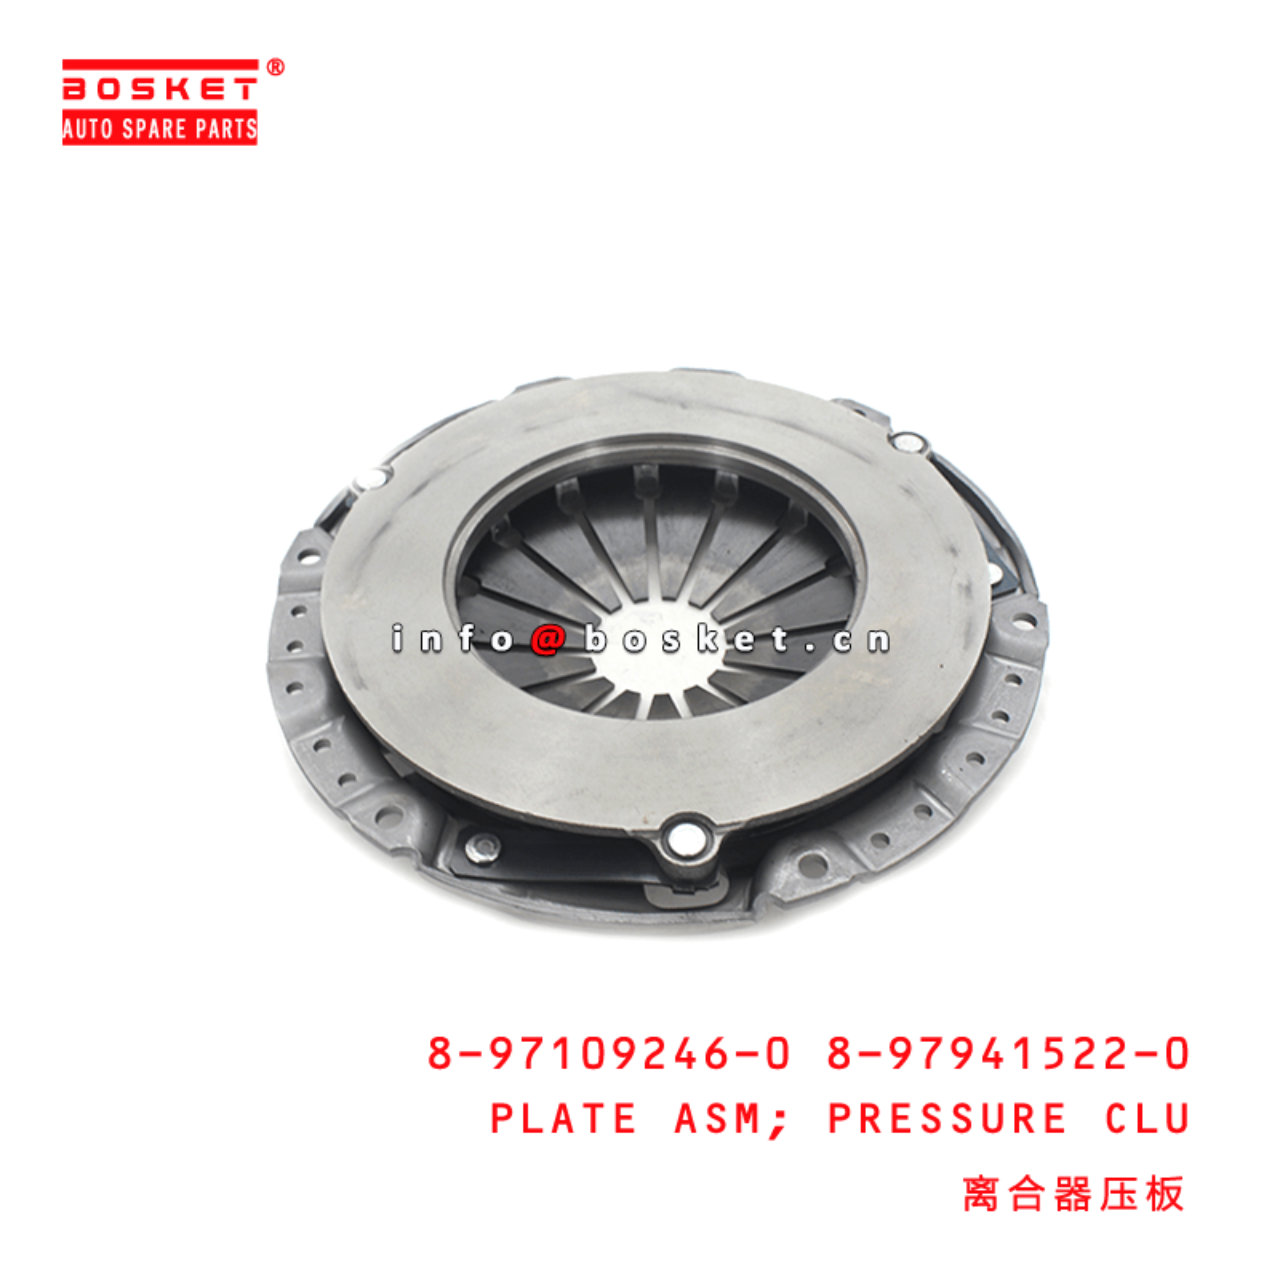 8-97109246-0 8-97941522-0 Pressure Clutch Plate Assembly 8971092460 8979415220 Suitable for ISUZU NK